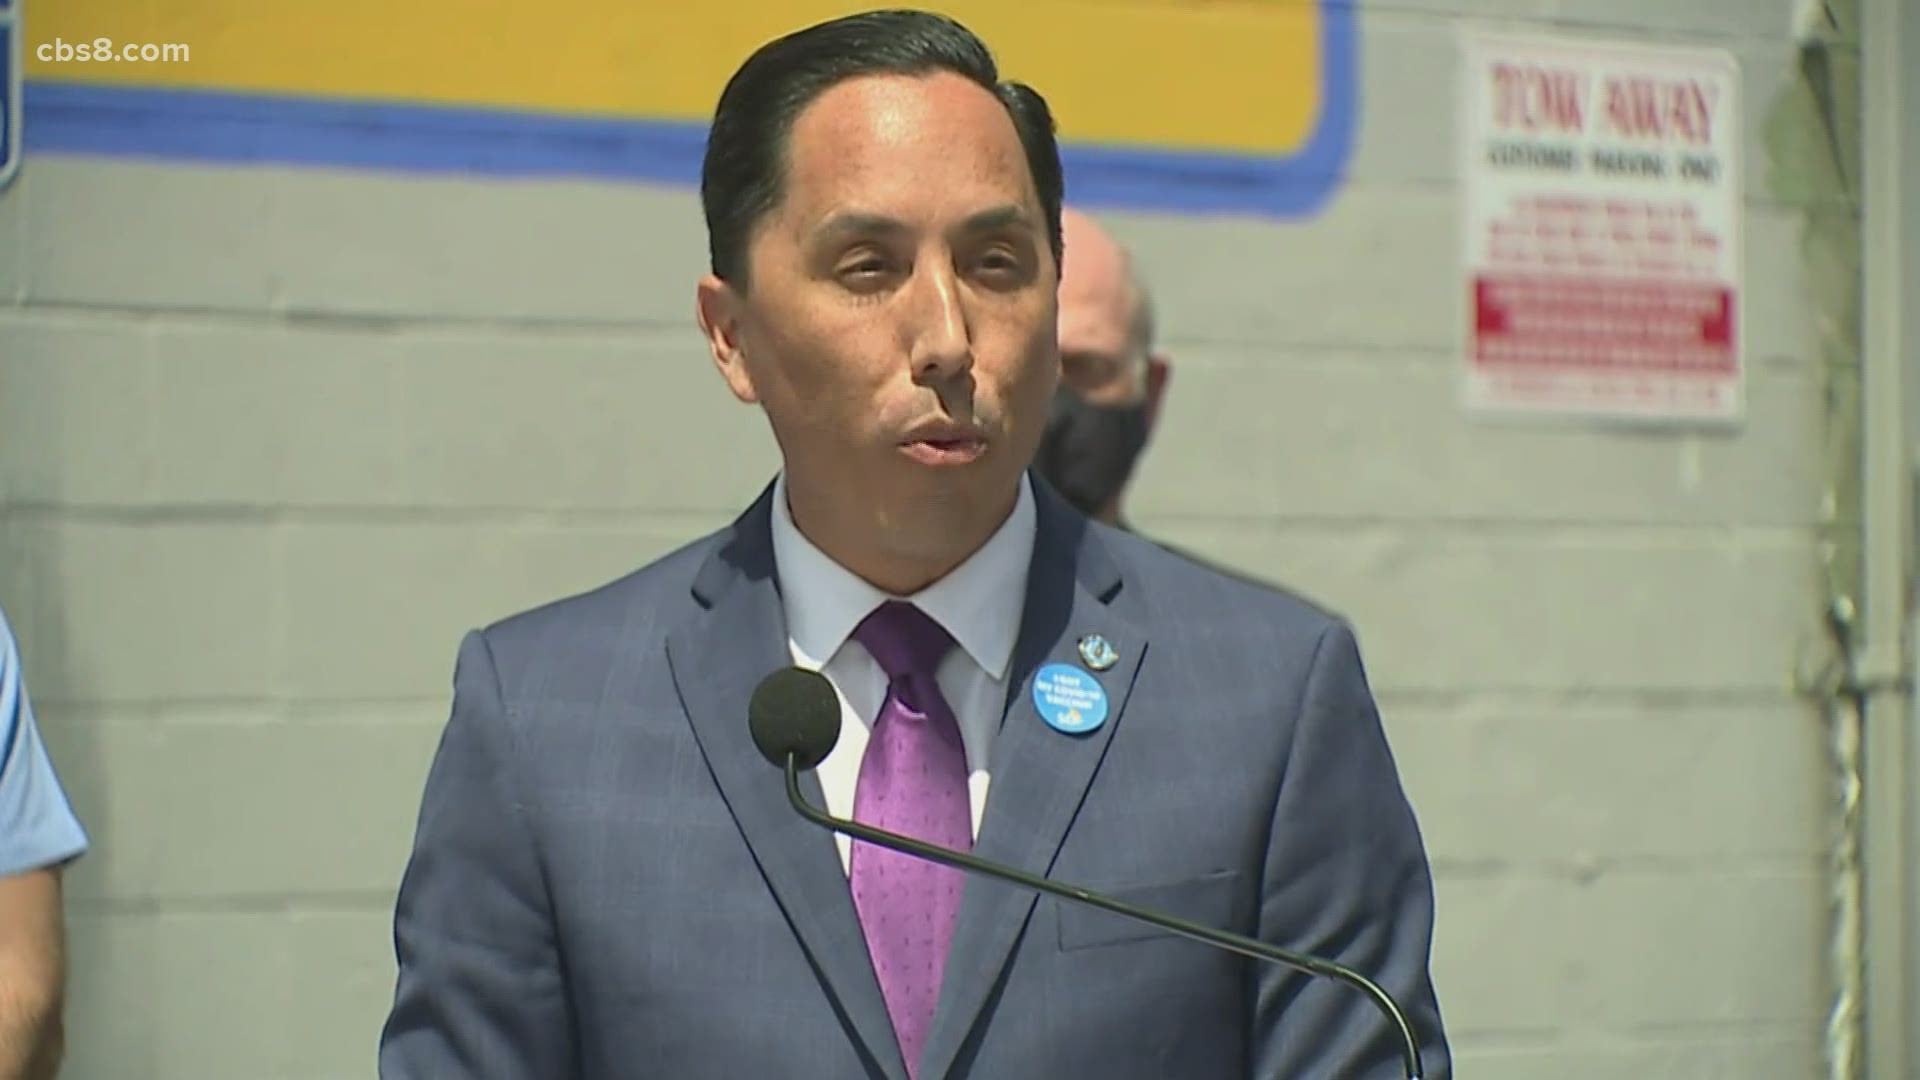 The mayor is expected to detail how his first budget will aim to get San Diego back on track with investments that are supposed to jumpstart the economy.